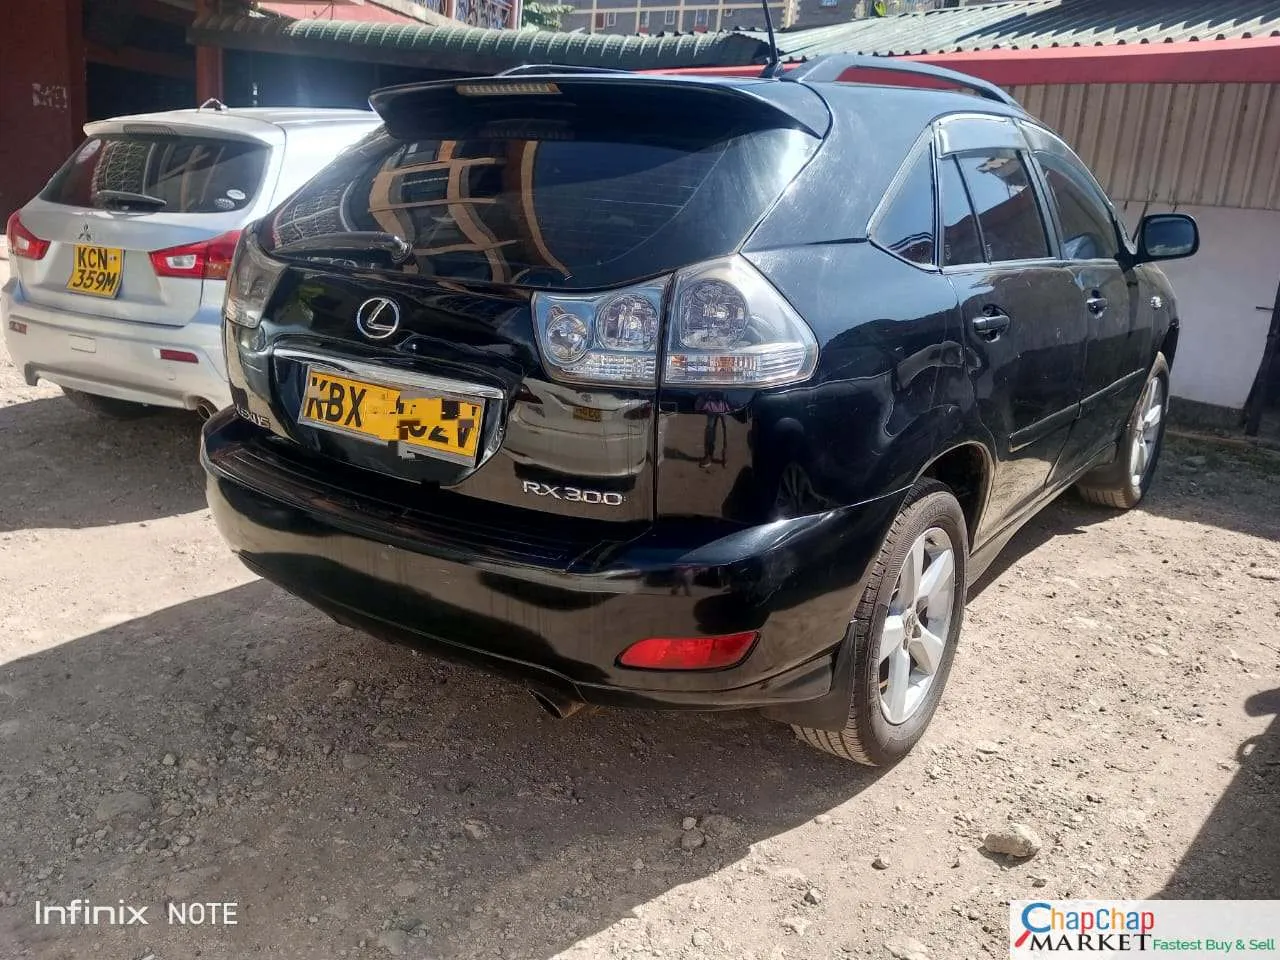 LEXUS RX 300 750K ONLY You Pay 30% Deposit Trade in OK EXCLUSIVE For Sale in Kenya hire purchase installments